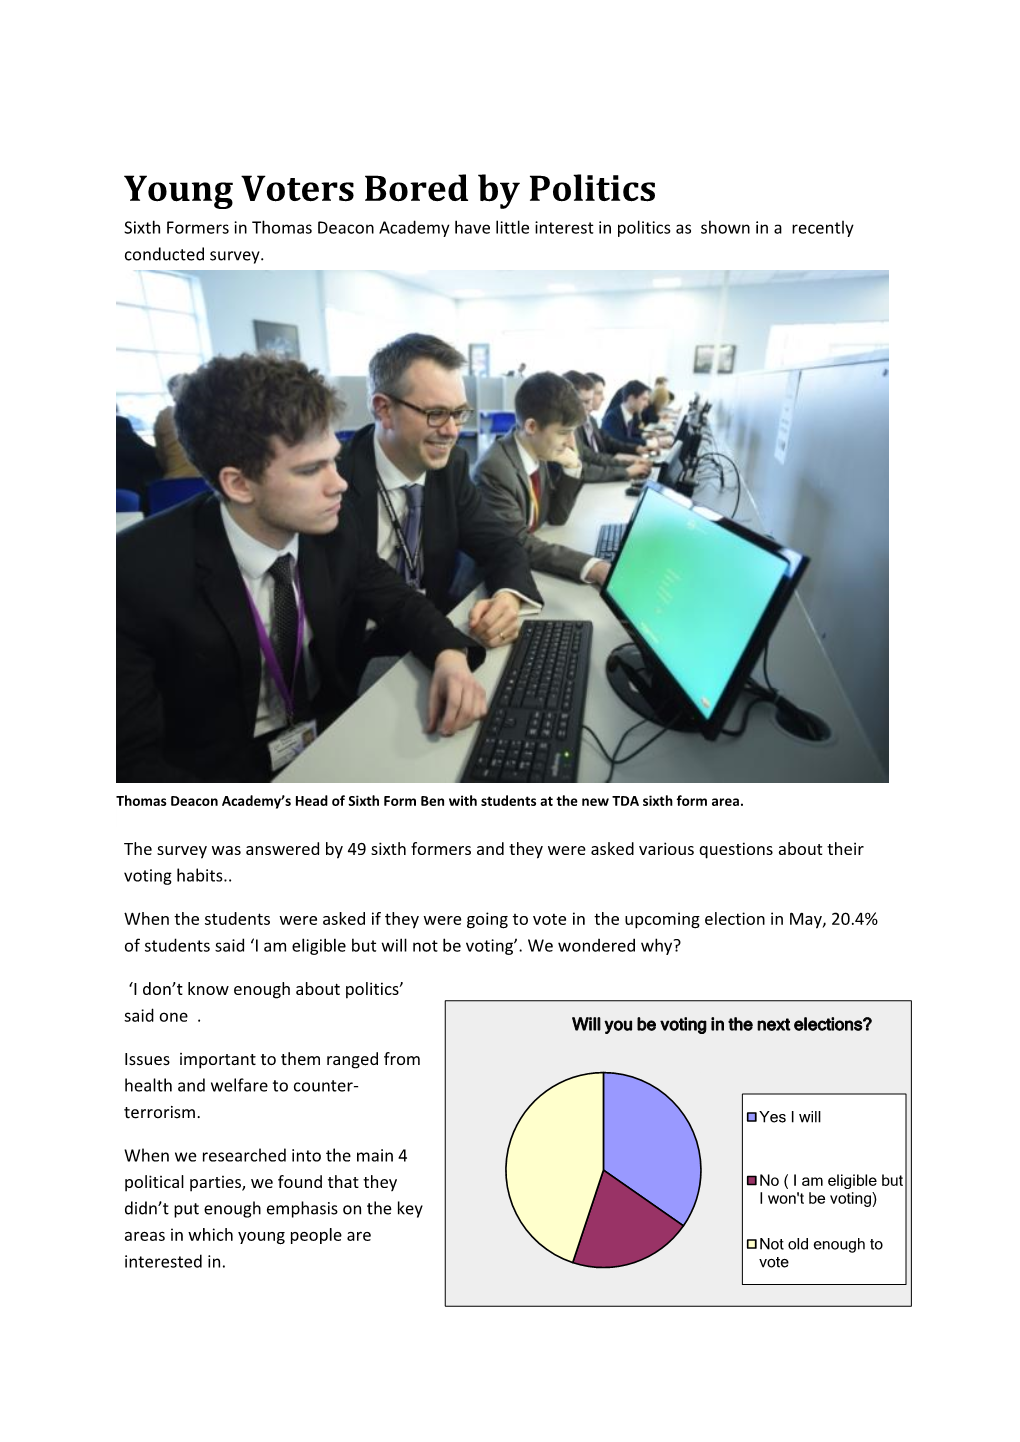 Young Voters Bored by Politics Sixth Formers in Thomas Deacon Academy Have Little Interest in Politics As Shown in a Recently Conducted Survey